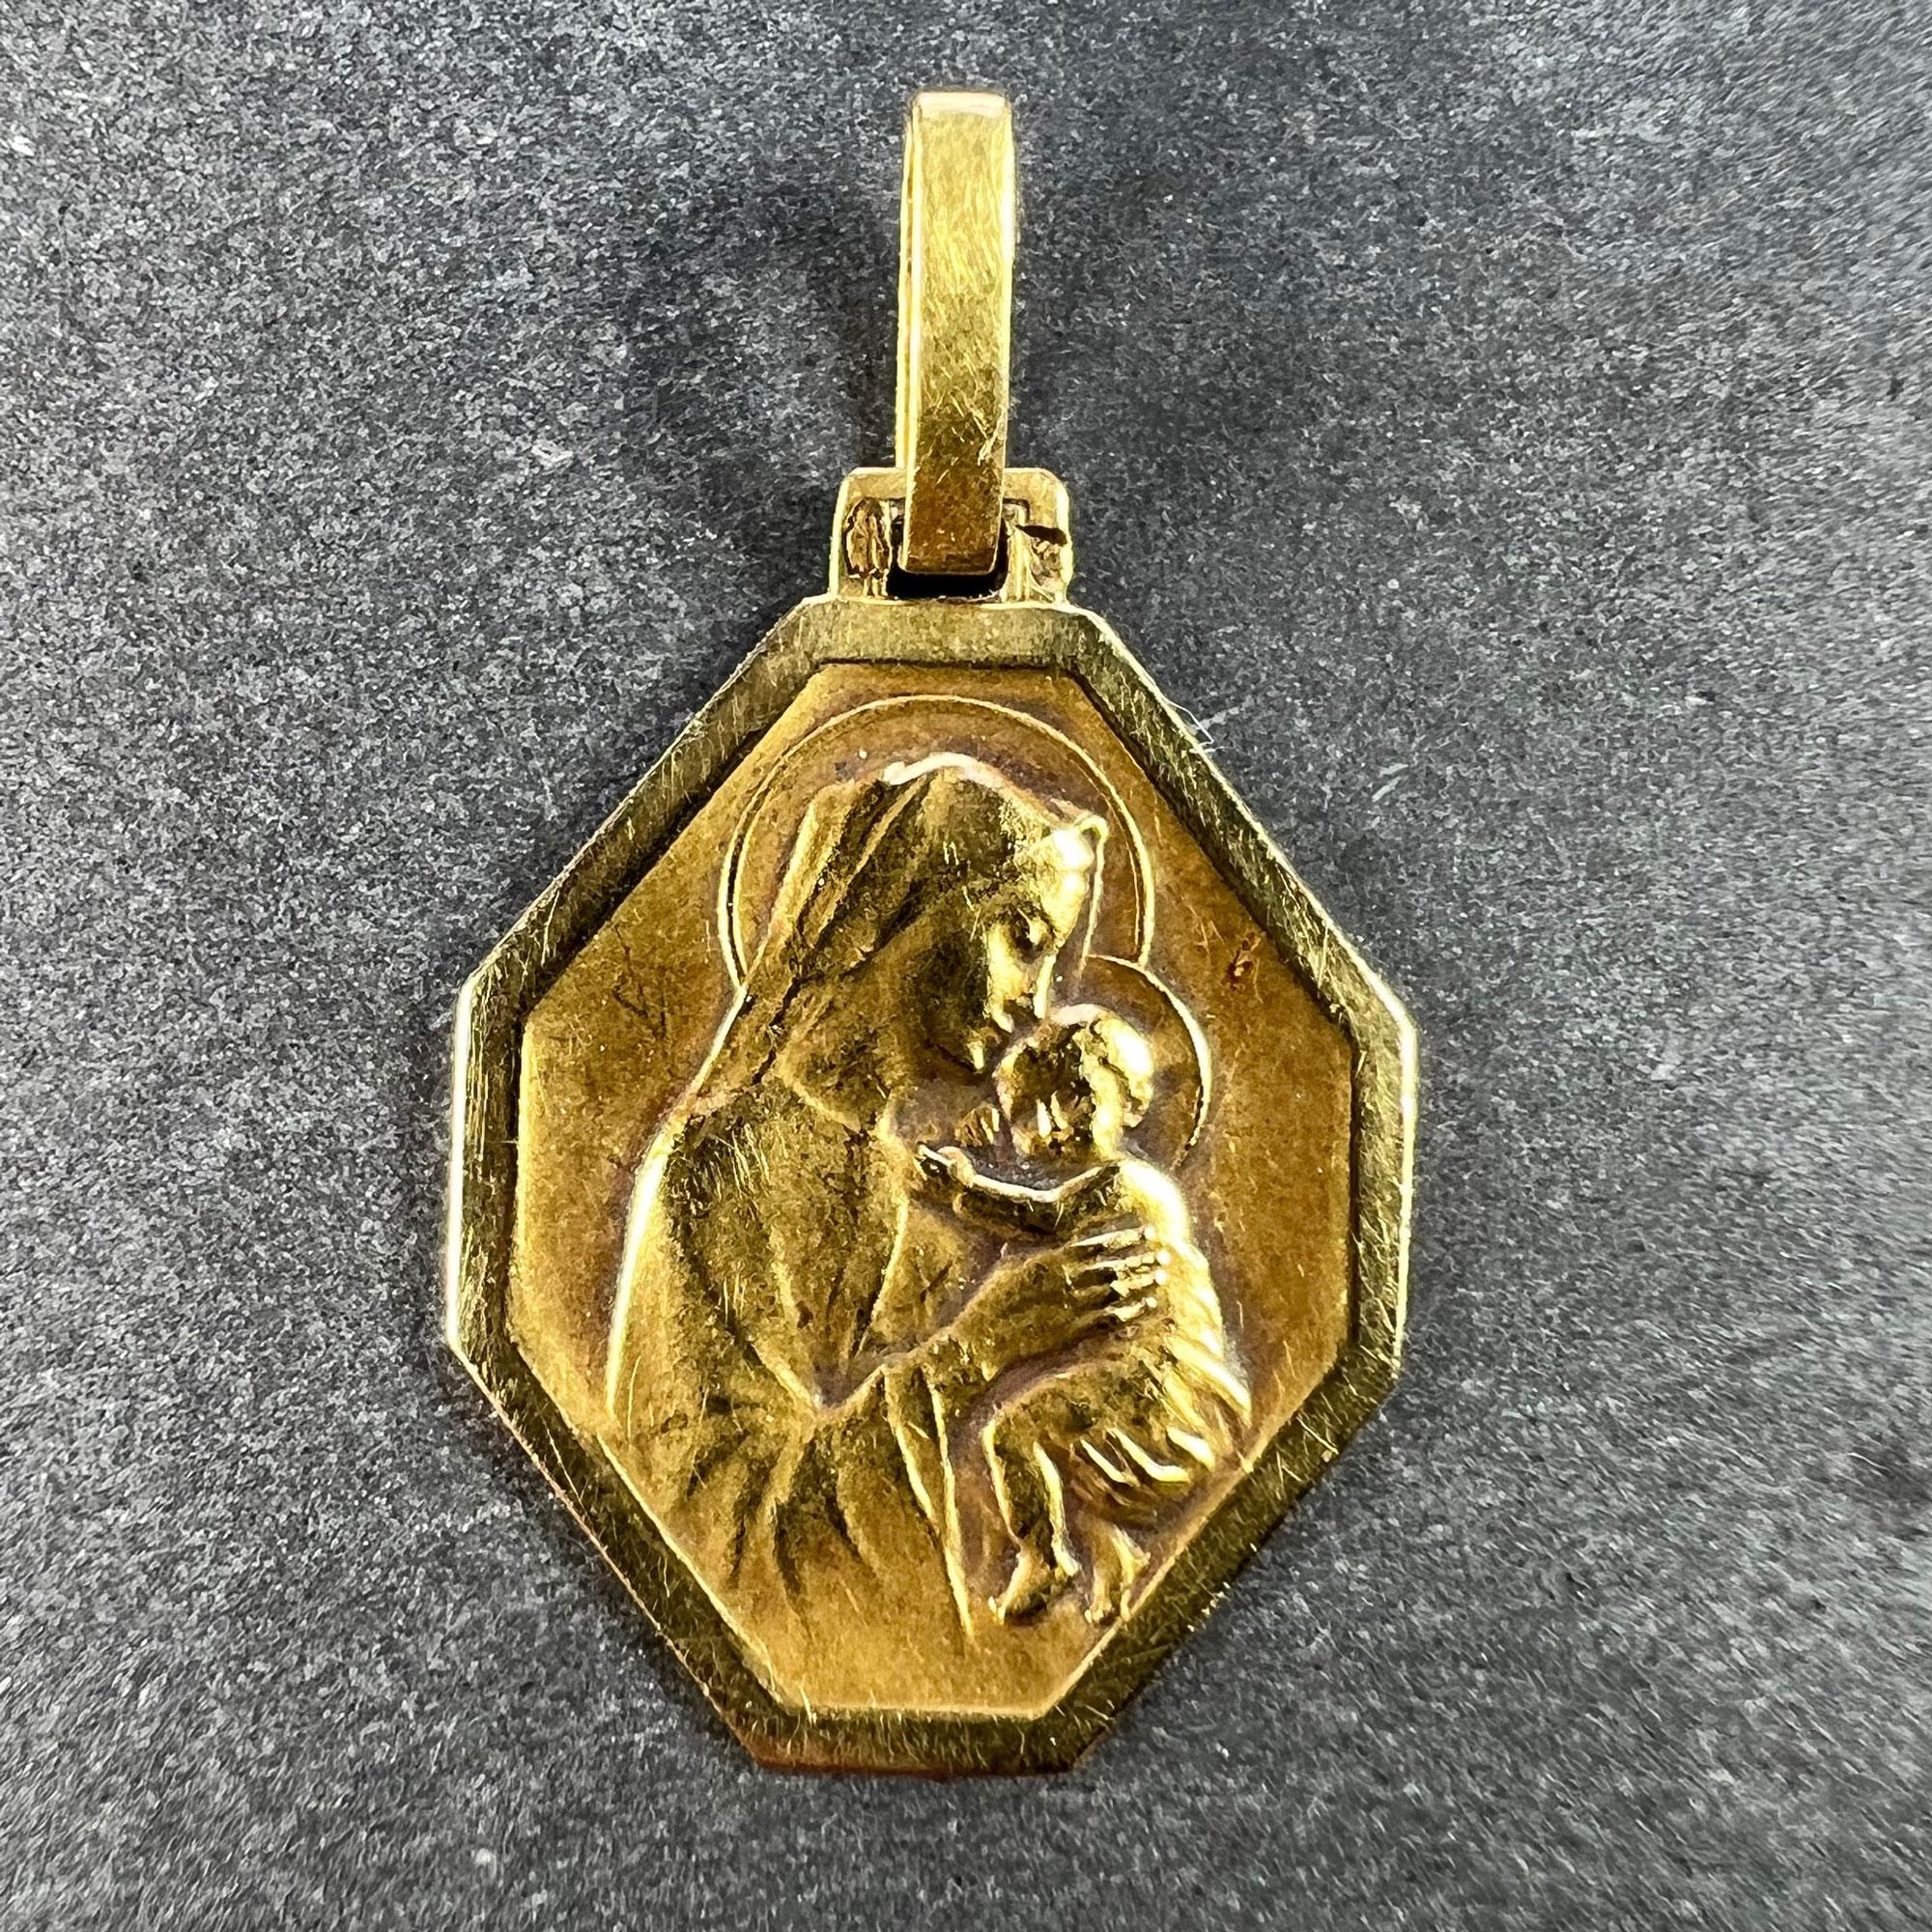 A French 18 karat (18K) yellow gold charm pendant designed as an octagonal medal depicting the Madonna and Child. The reverse is engraved with the initials MG and the date '30 Juillet 1942'. Stamped with the eagle's head mark for 18 karat gold and